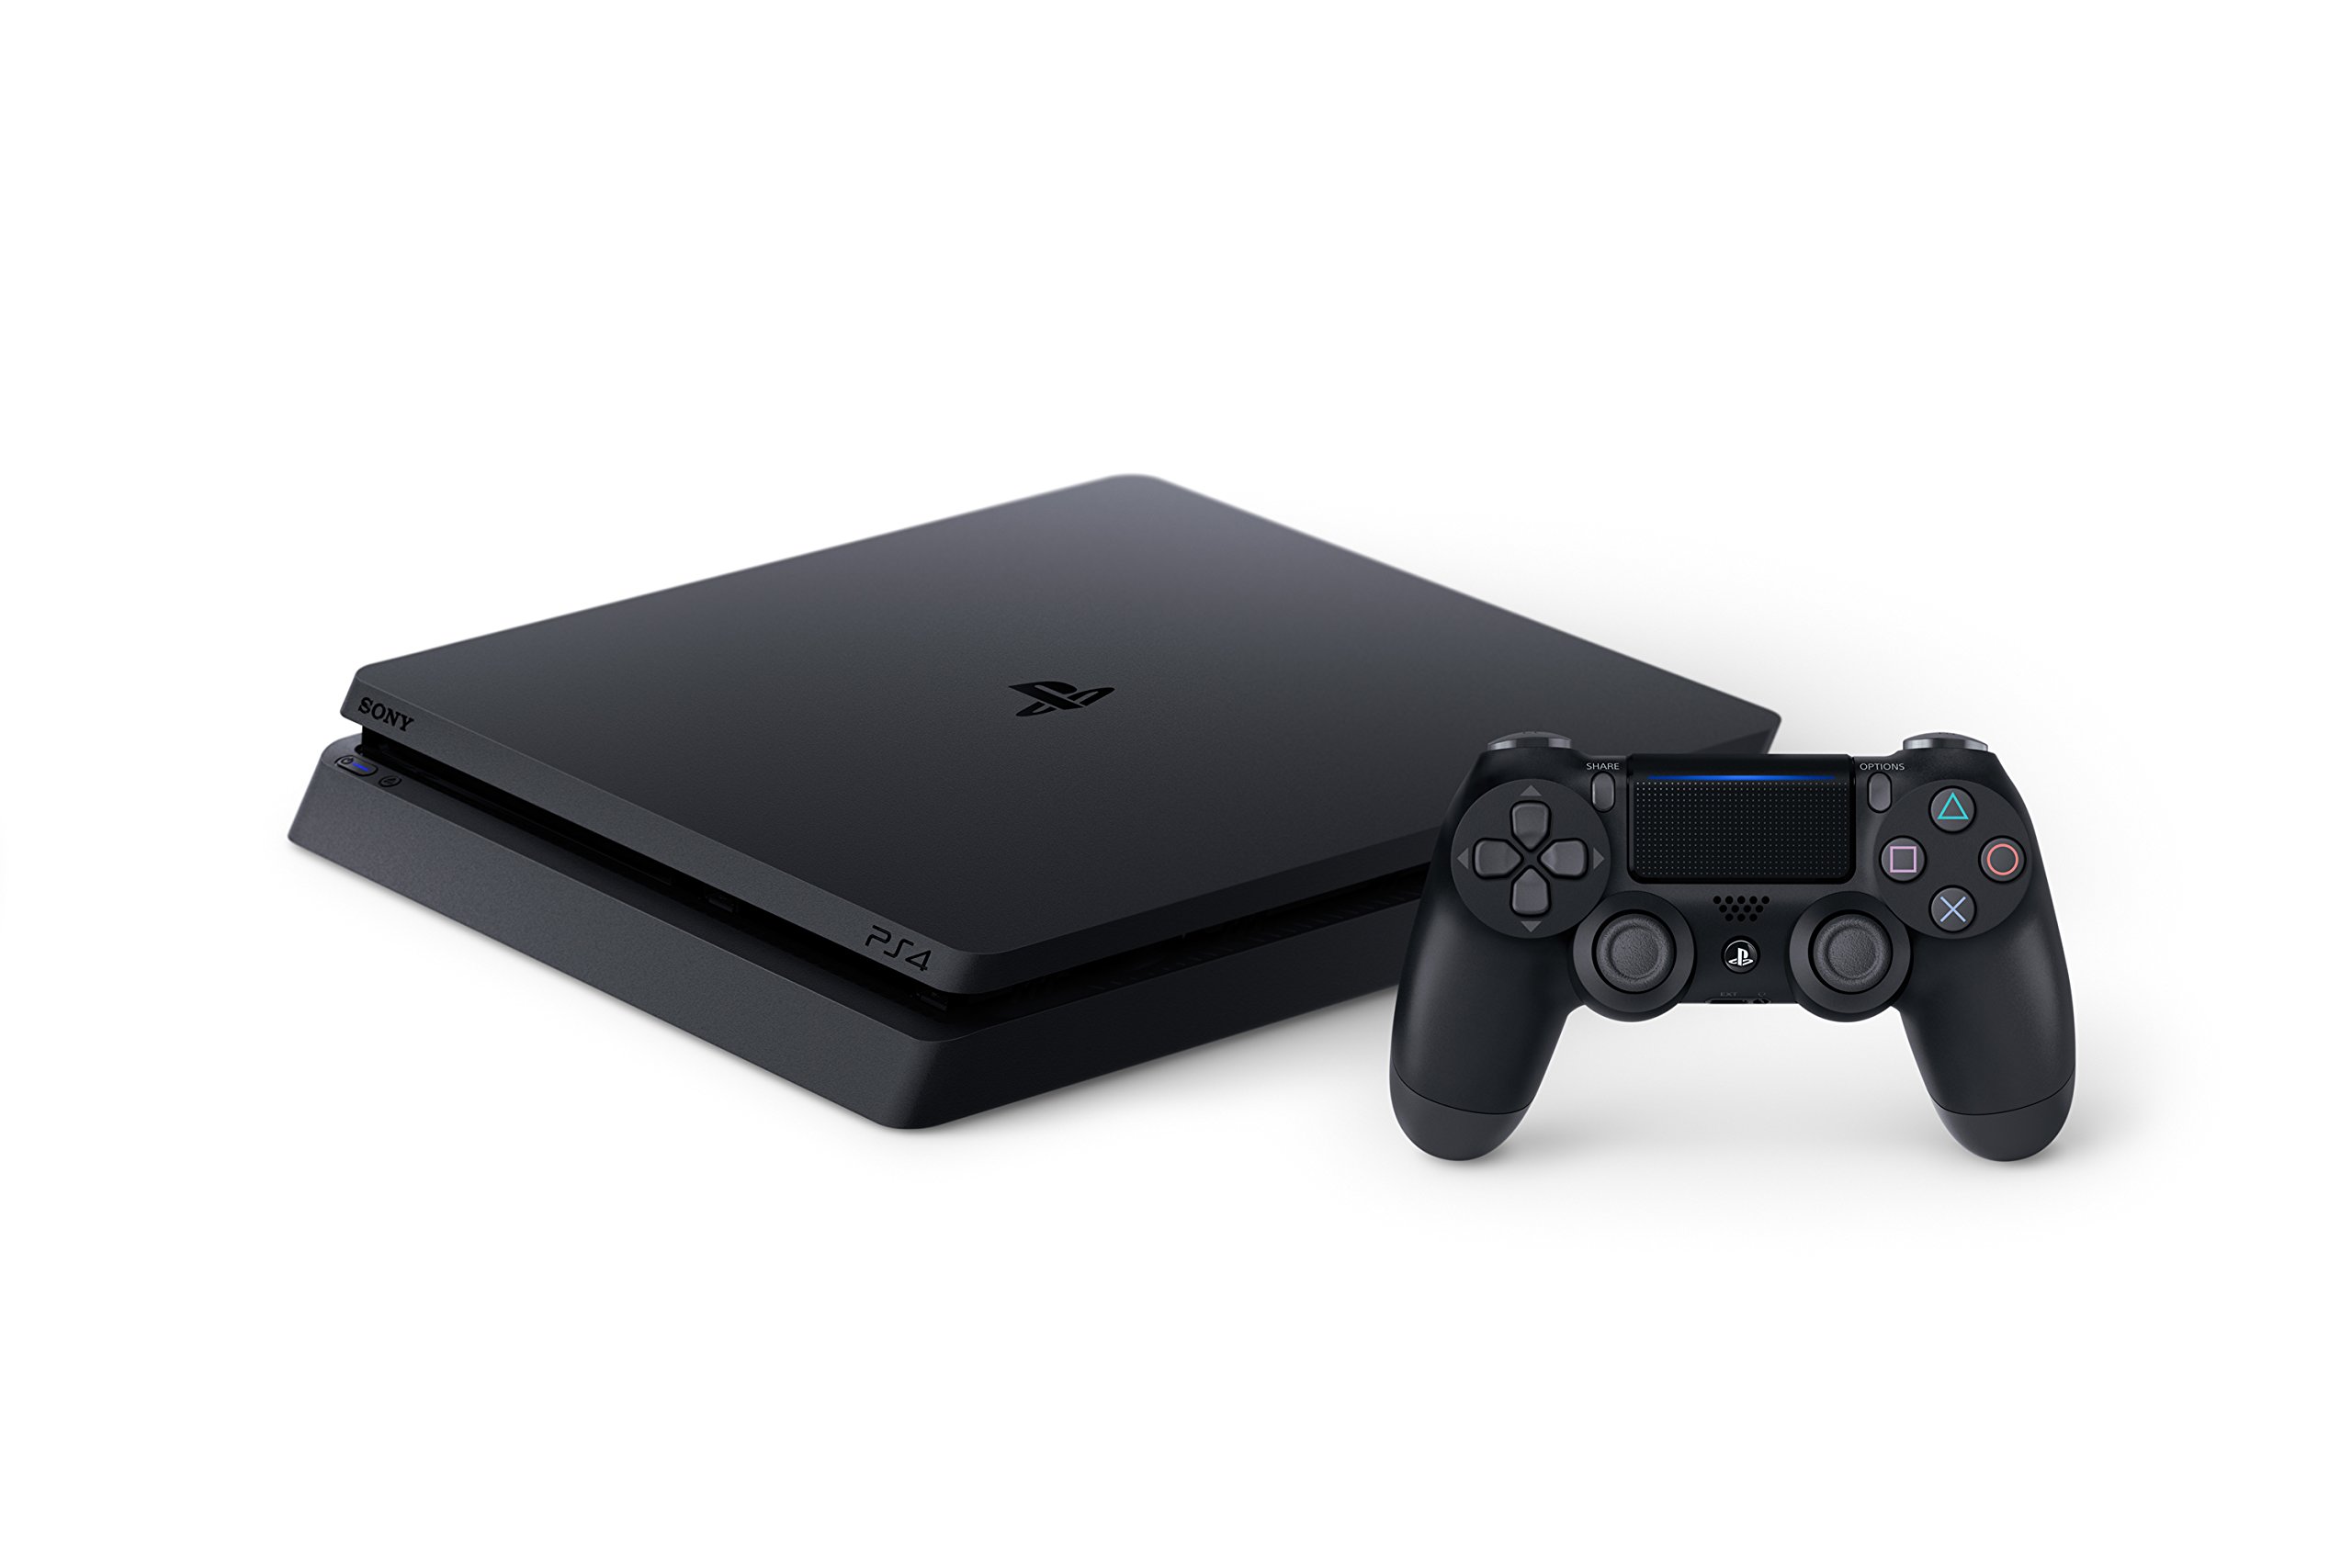 playstation 4 slim 1tb console - image 1 of 7